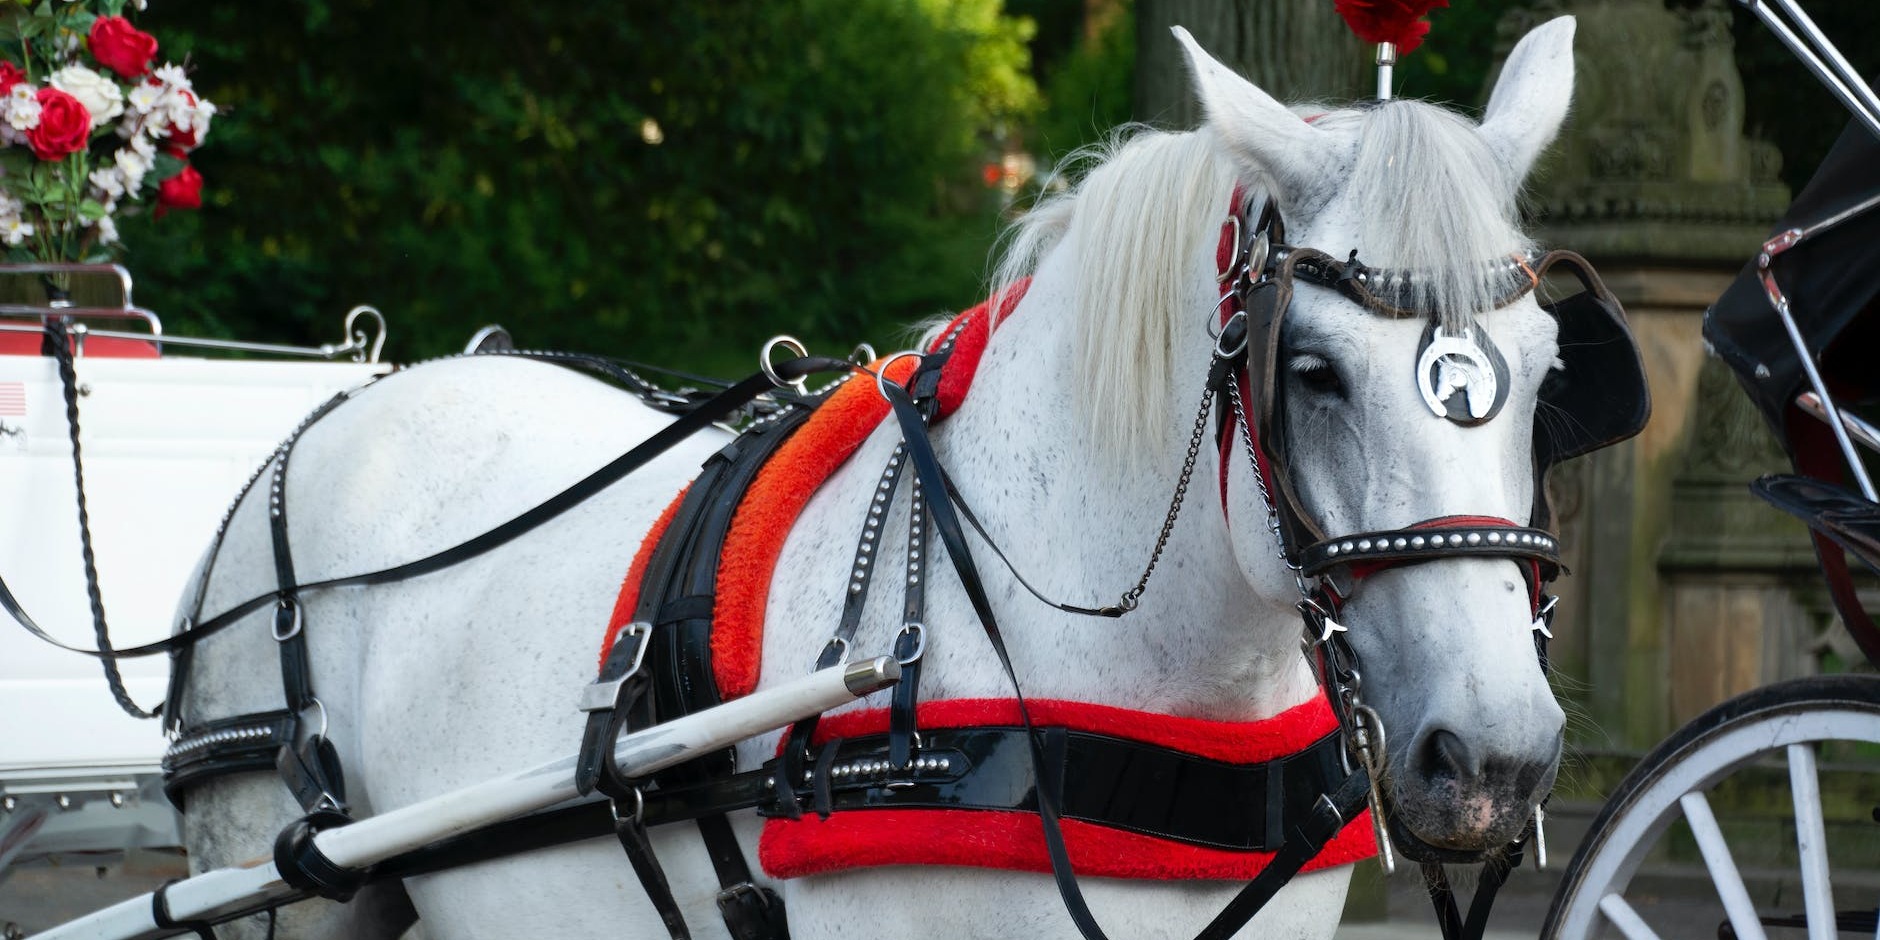 Experience the Romance of a Horse and Carriage Ride in Greater London